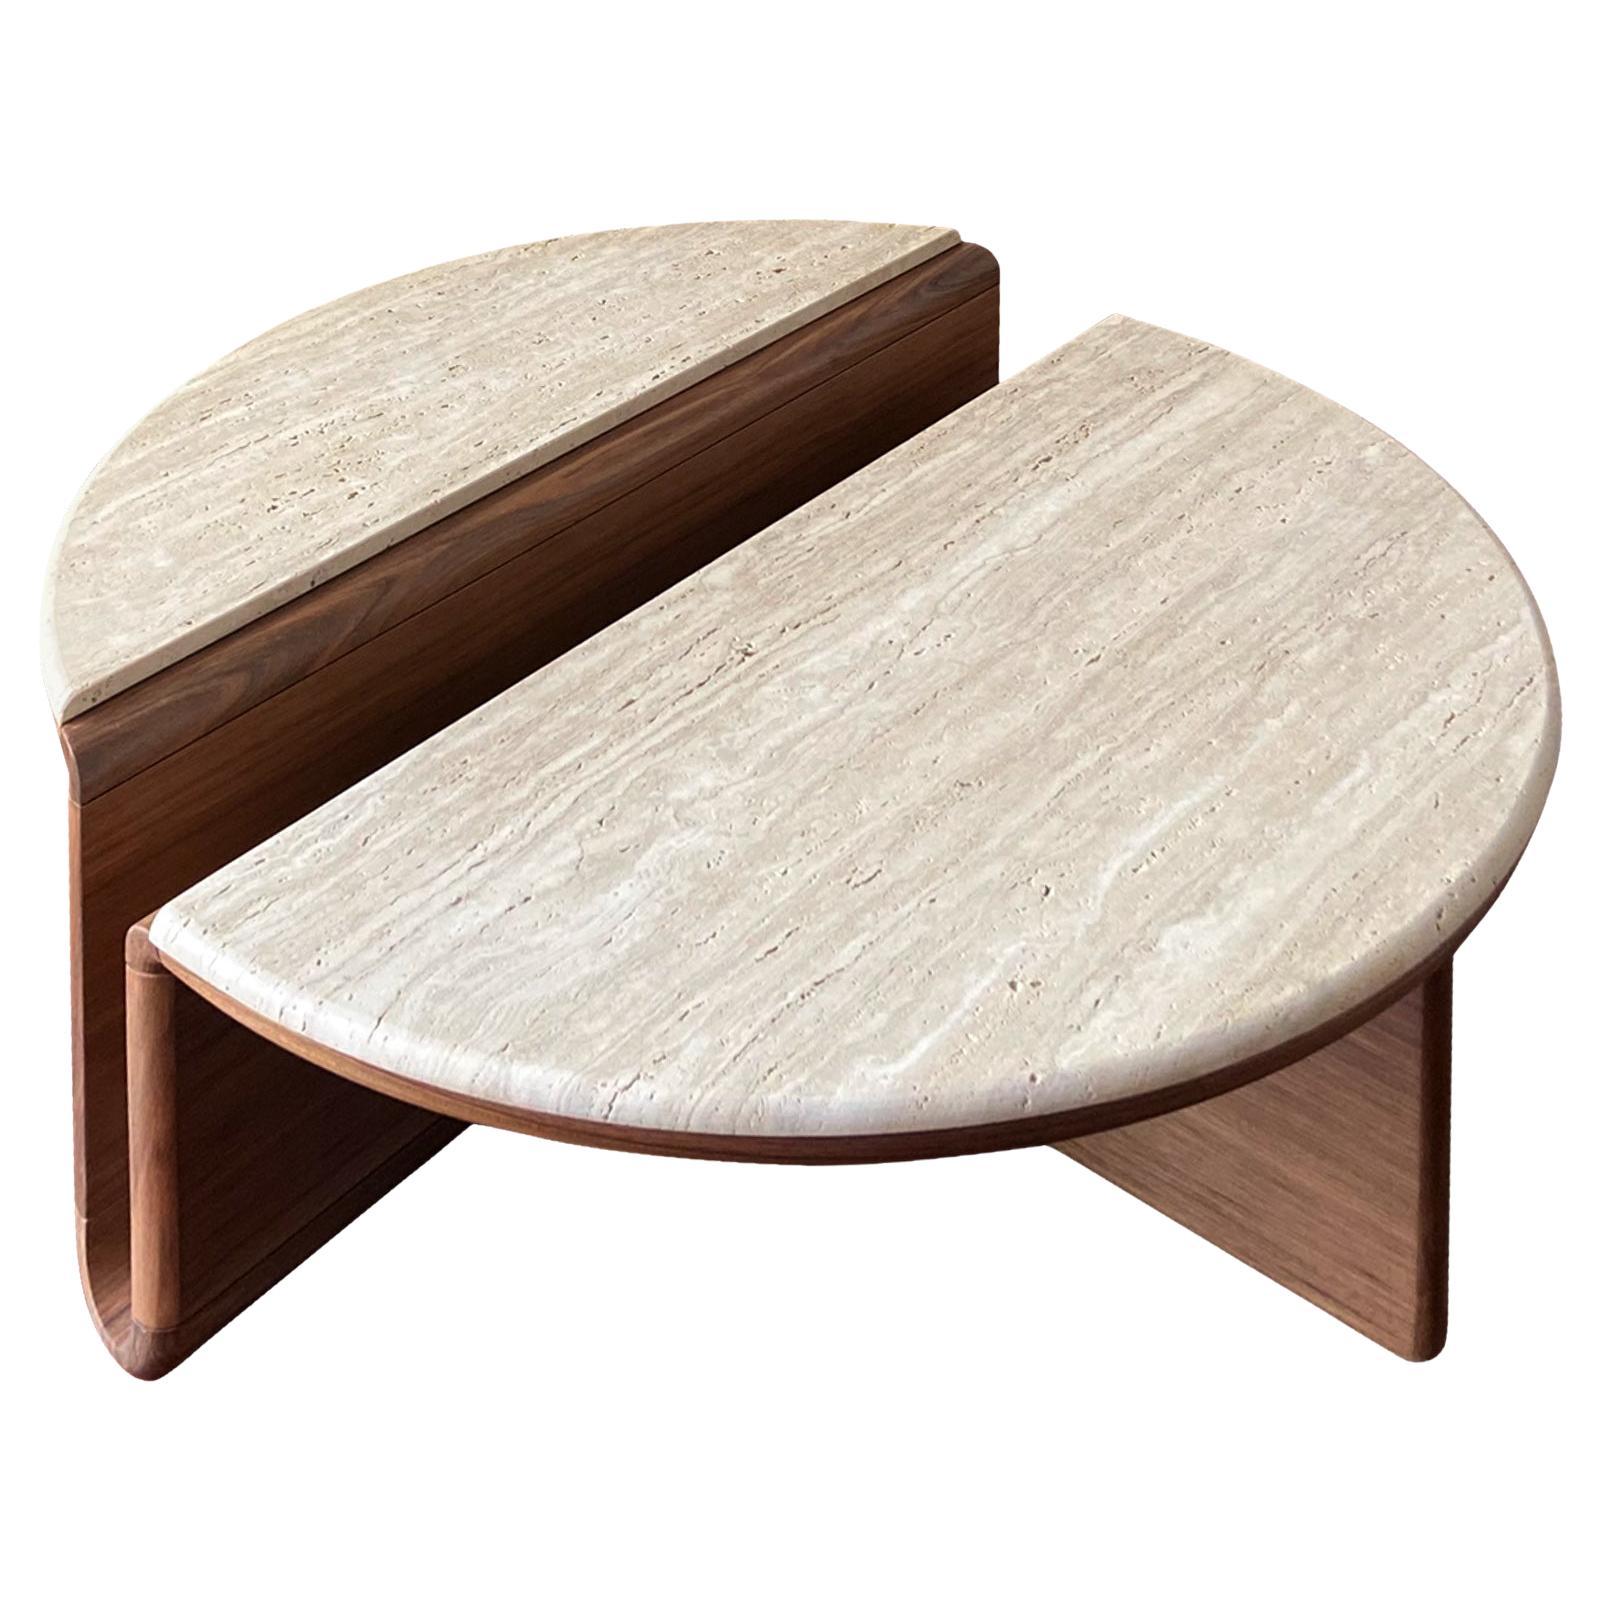 Kanyon Coffee Table with Travertine, Contemporary Sculptural Round Walnut For Sale